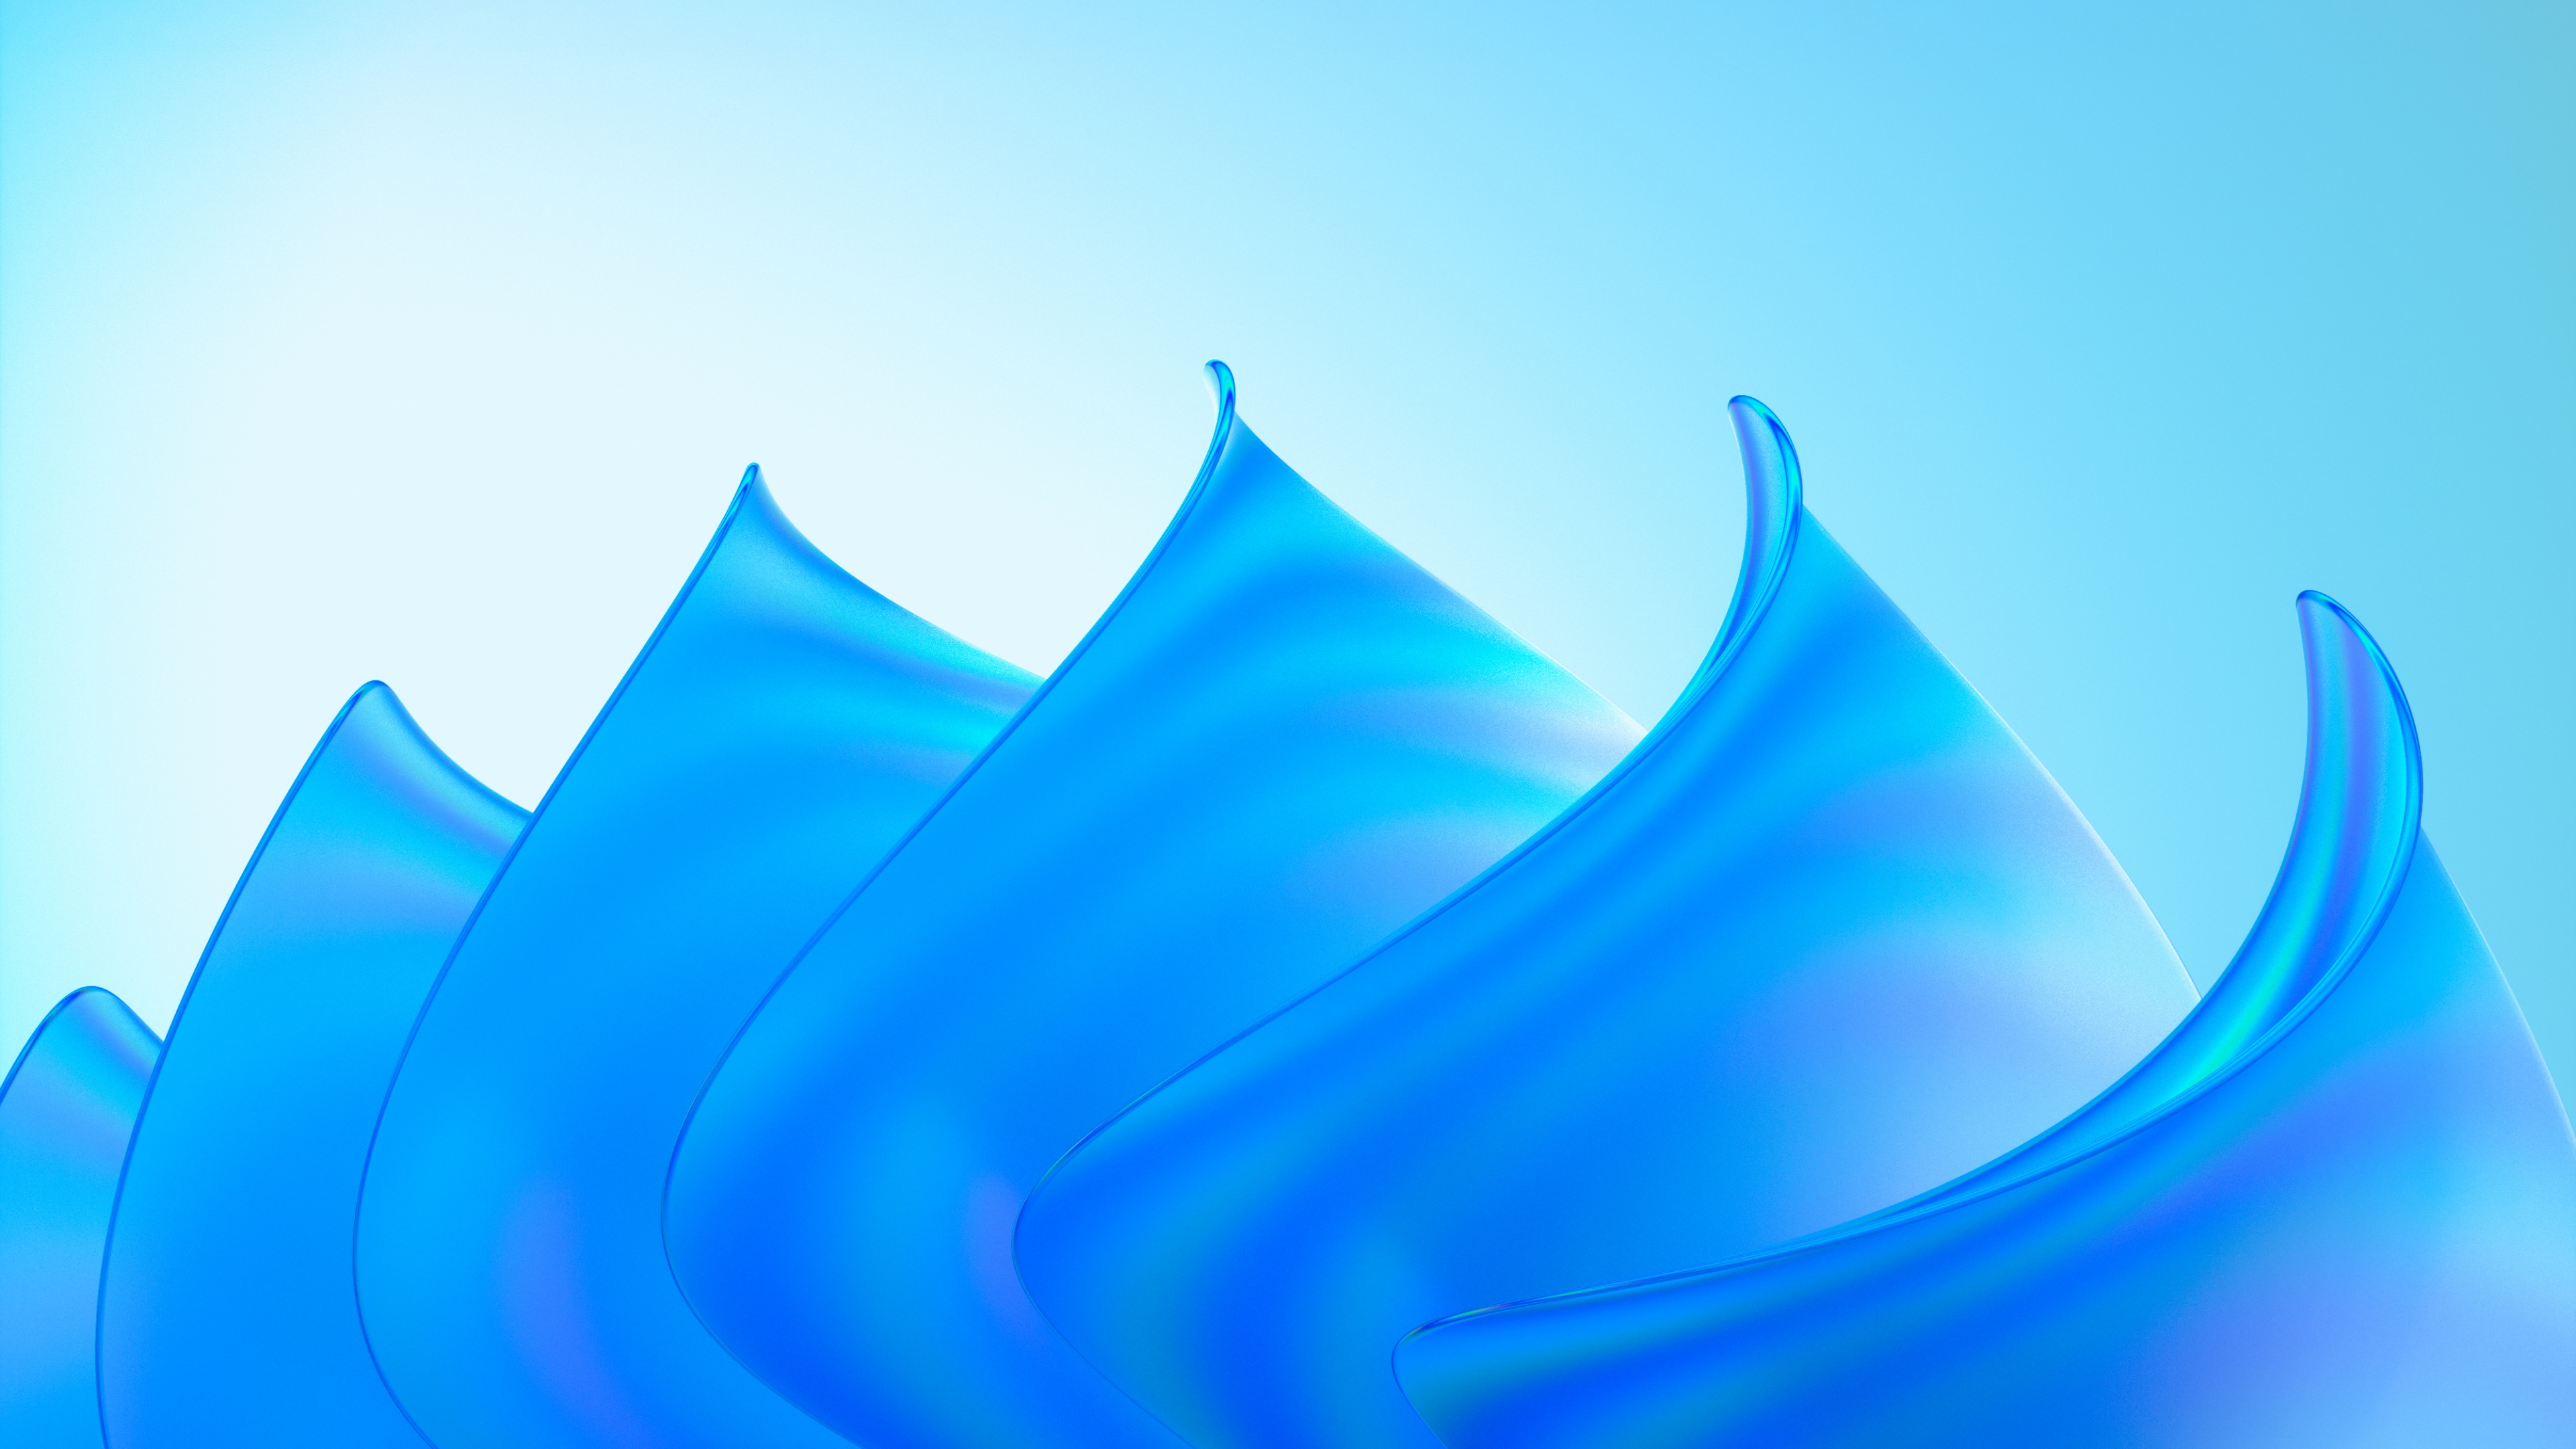 sky blue background abstract